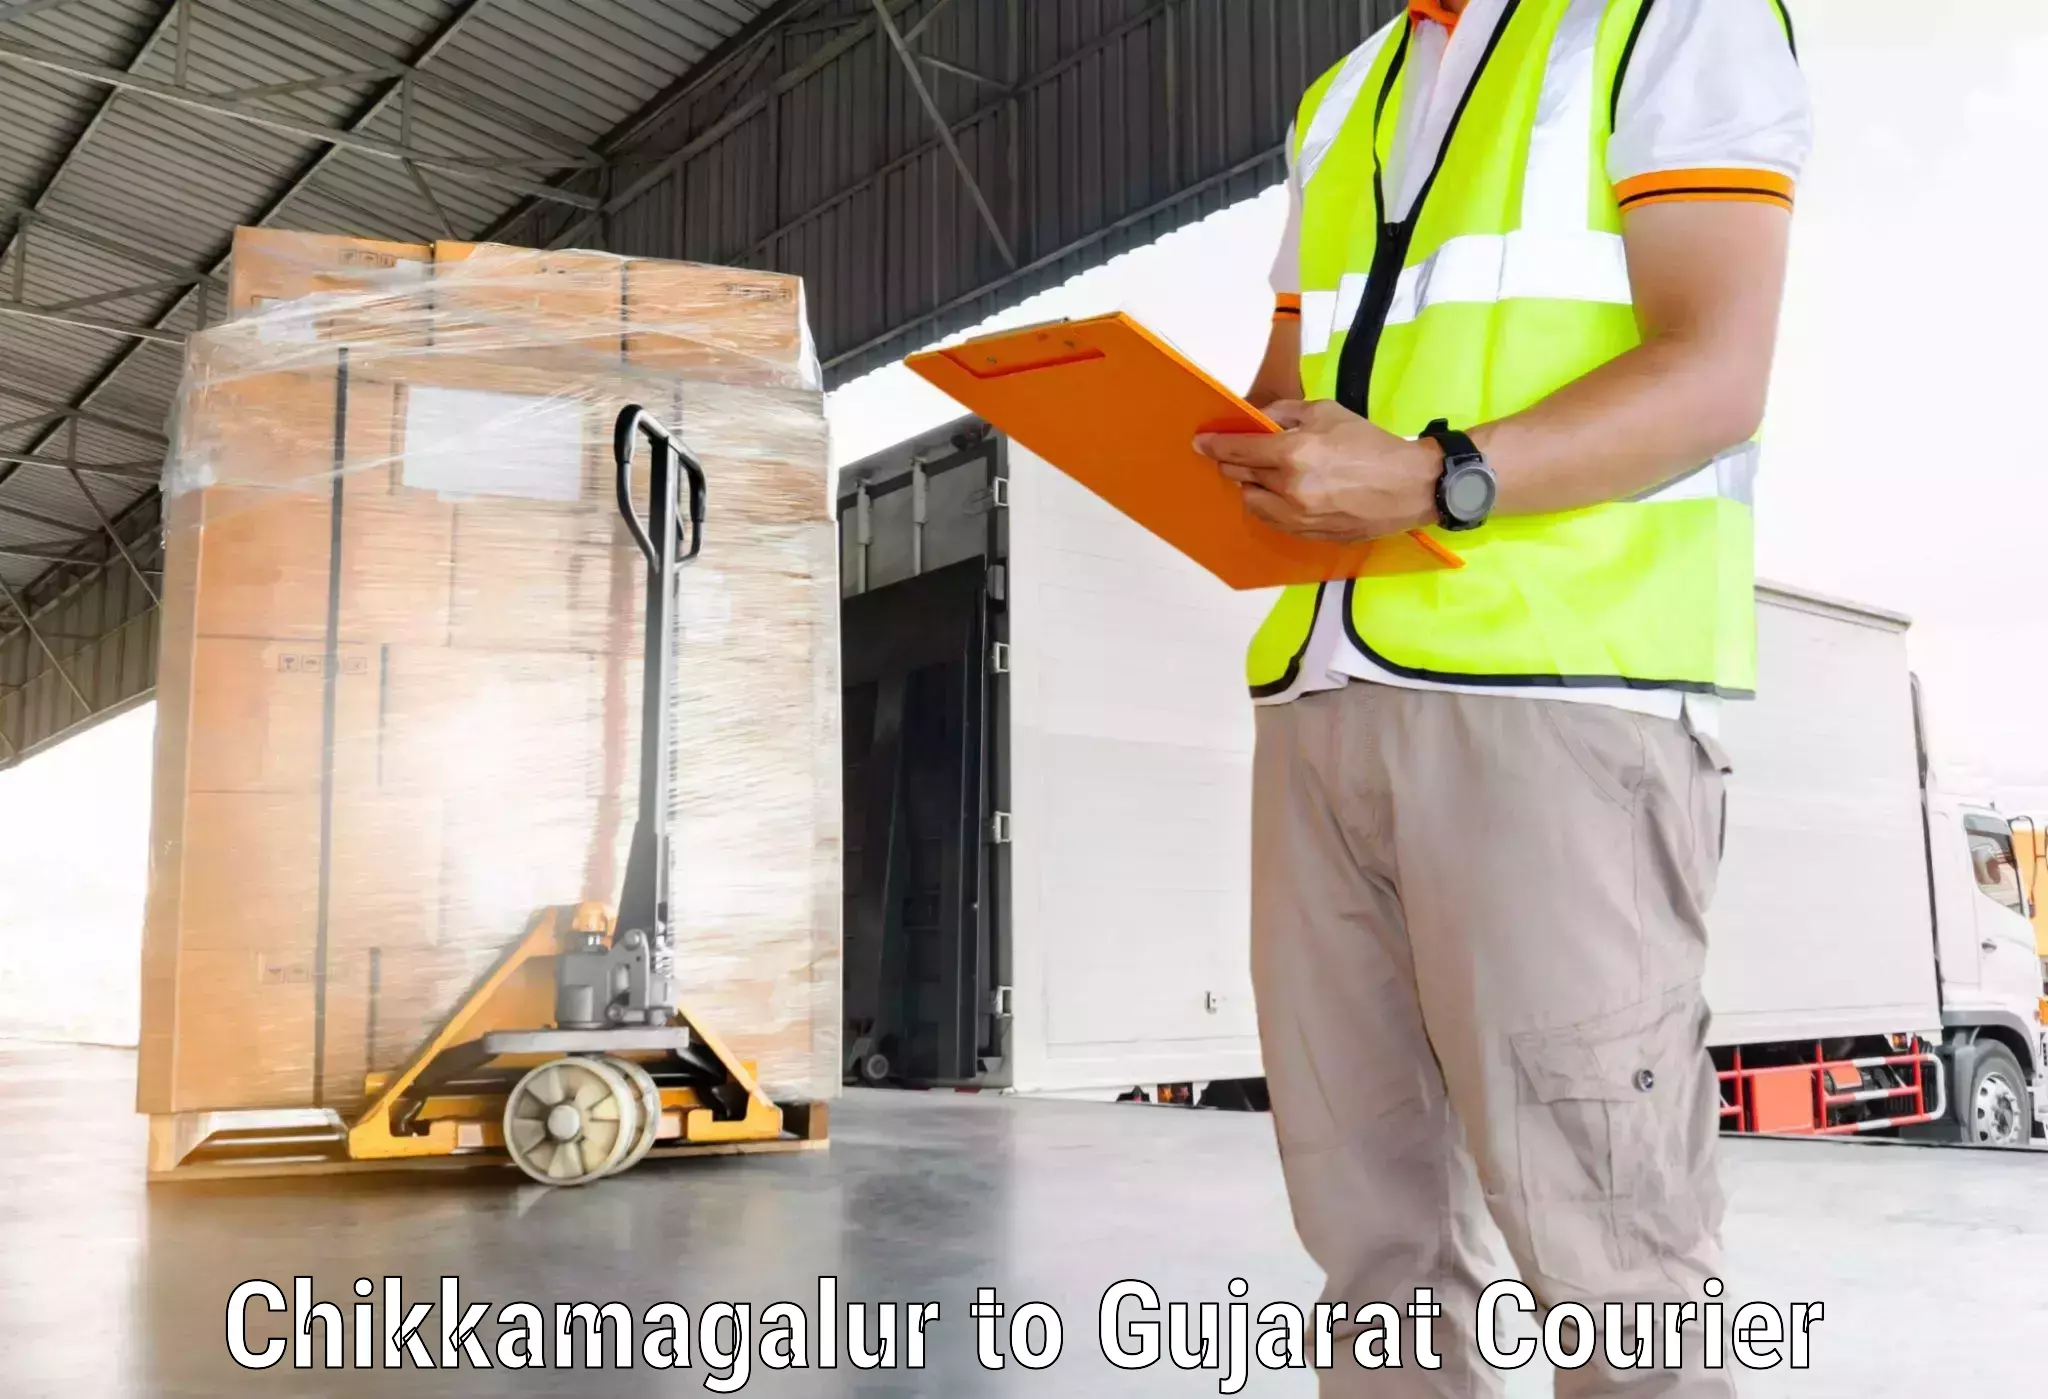 Global courier networks Chikkamagalur to Gandhidham